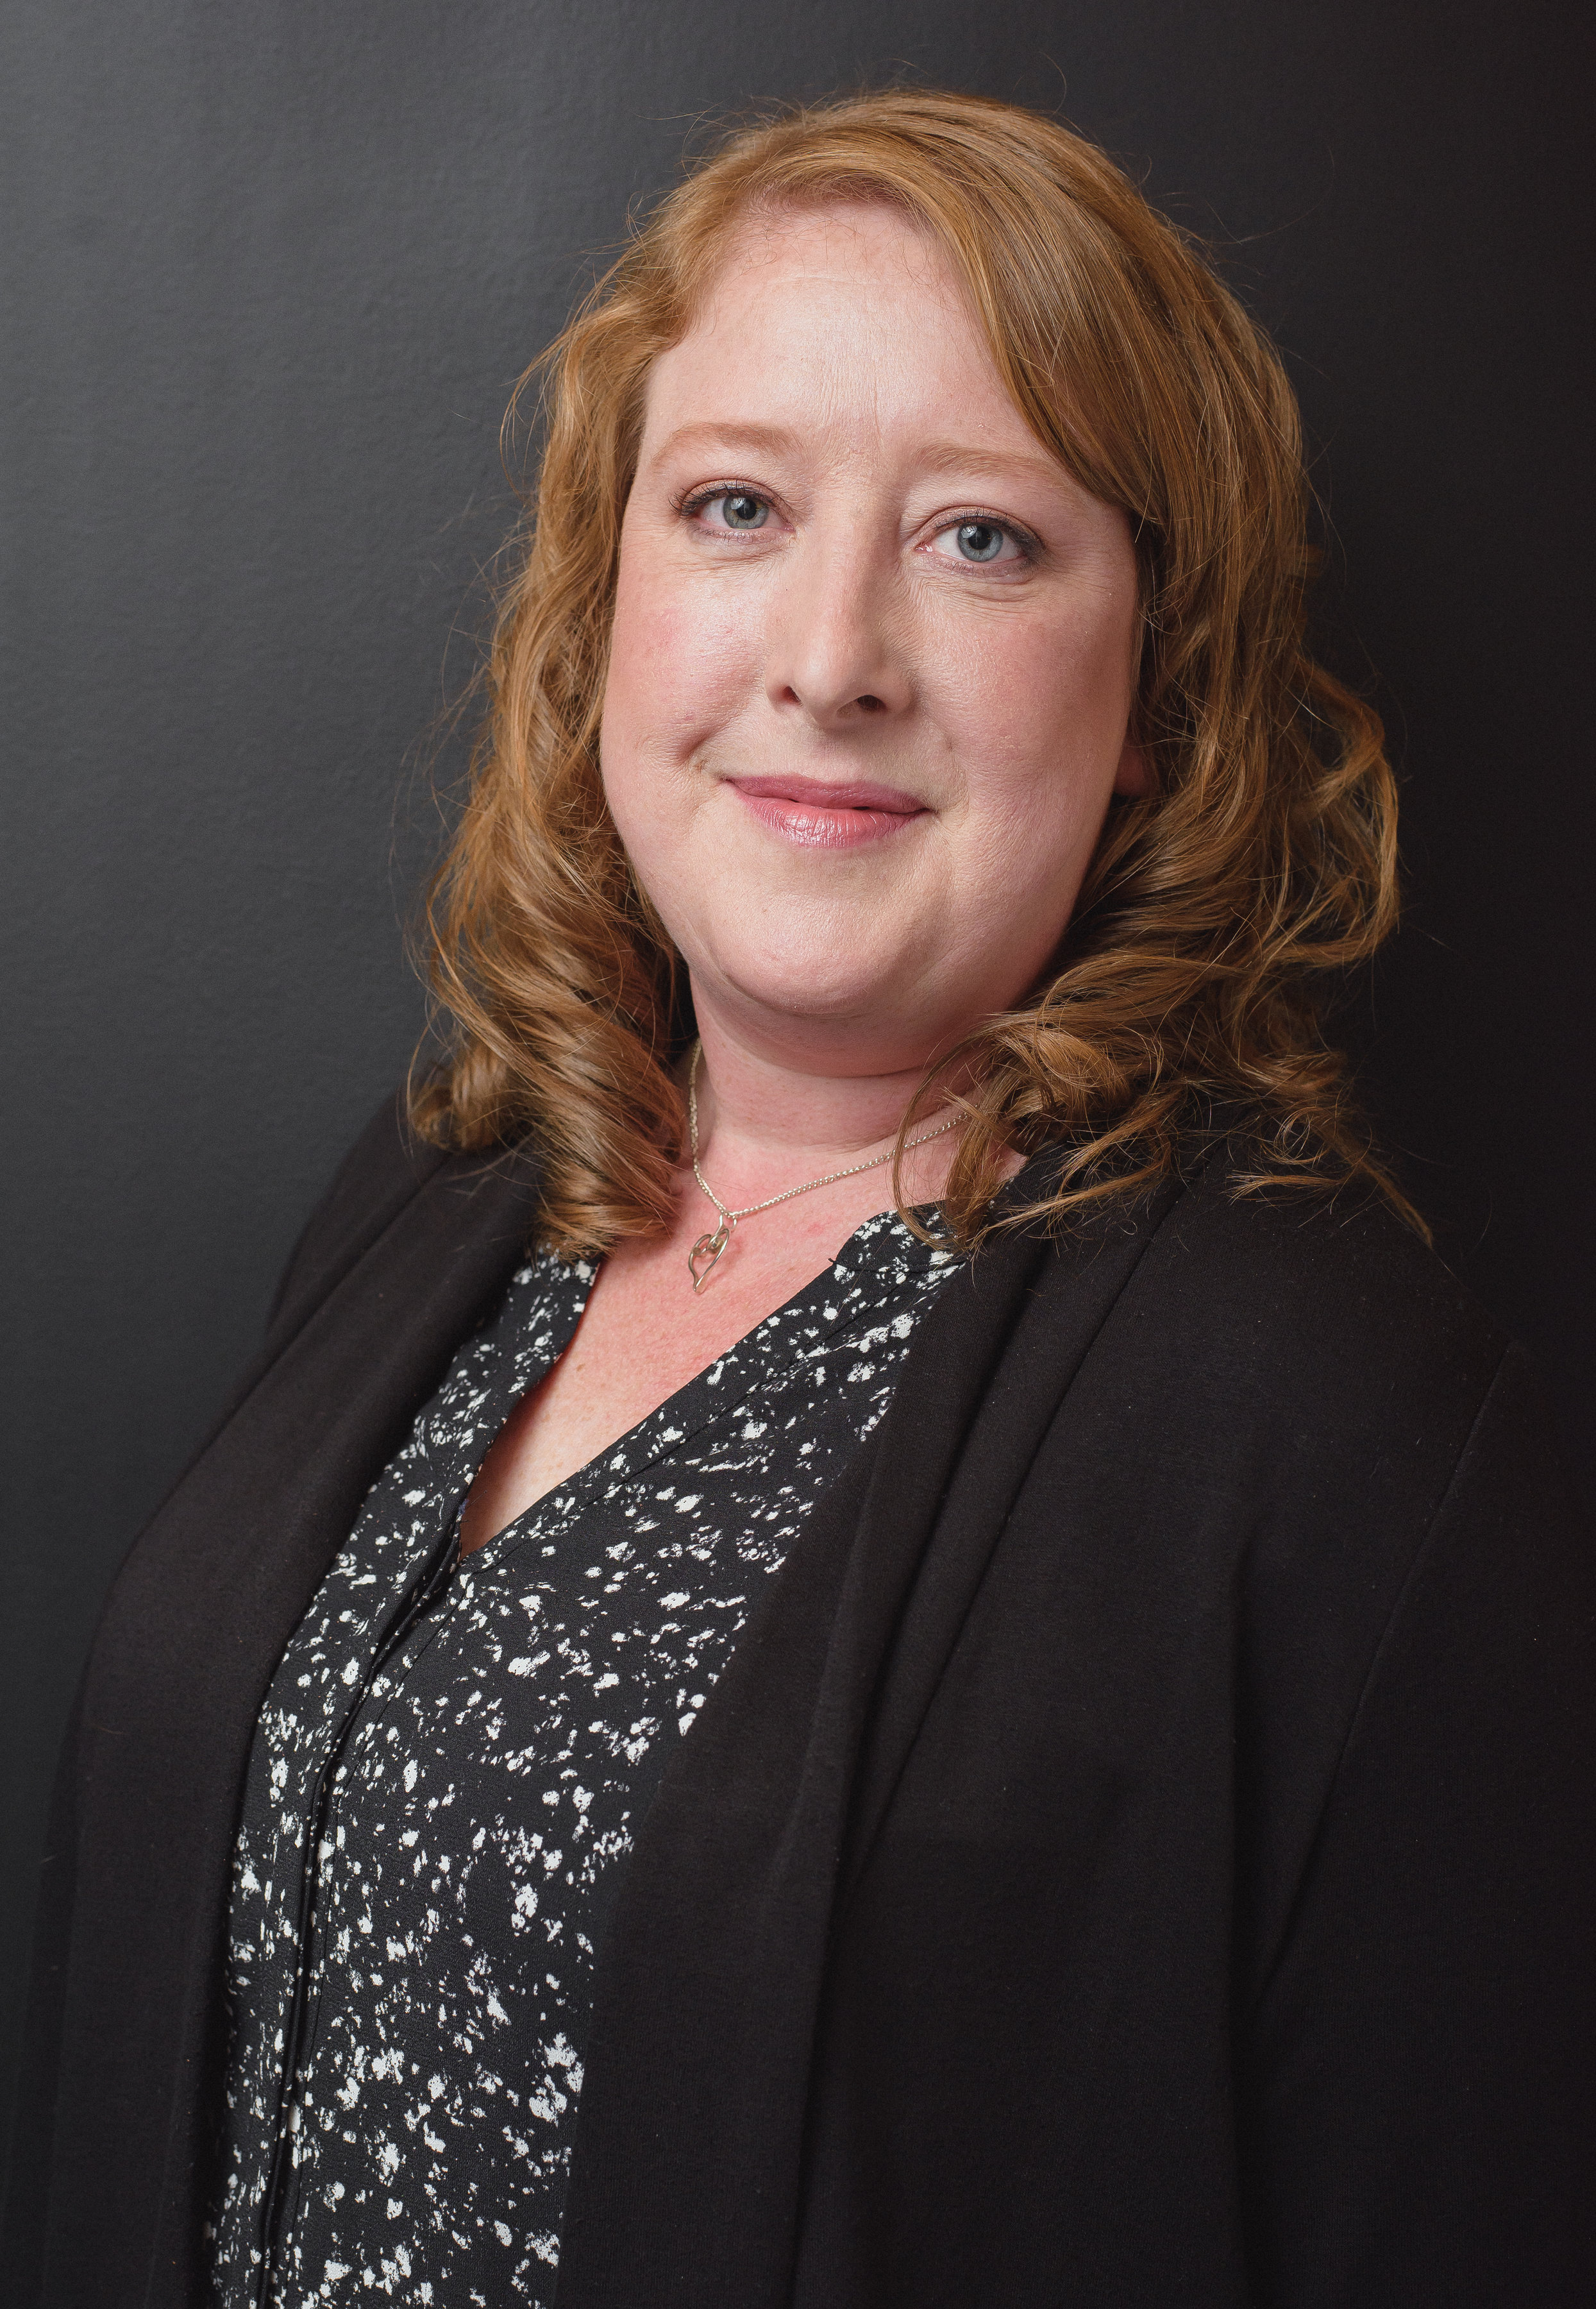 Waterstone Mortgage Corporation has announced the promotion of Ericka Smith to the role of Vice President of Marketing at the company's Pewaukee, Wis.-based corporate office